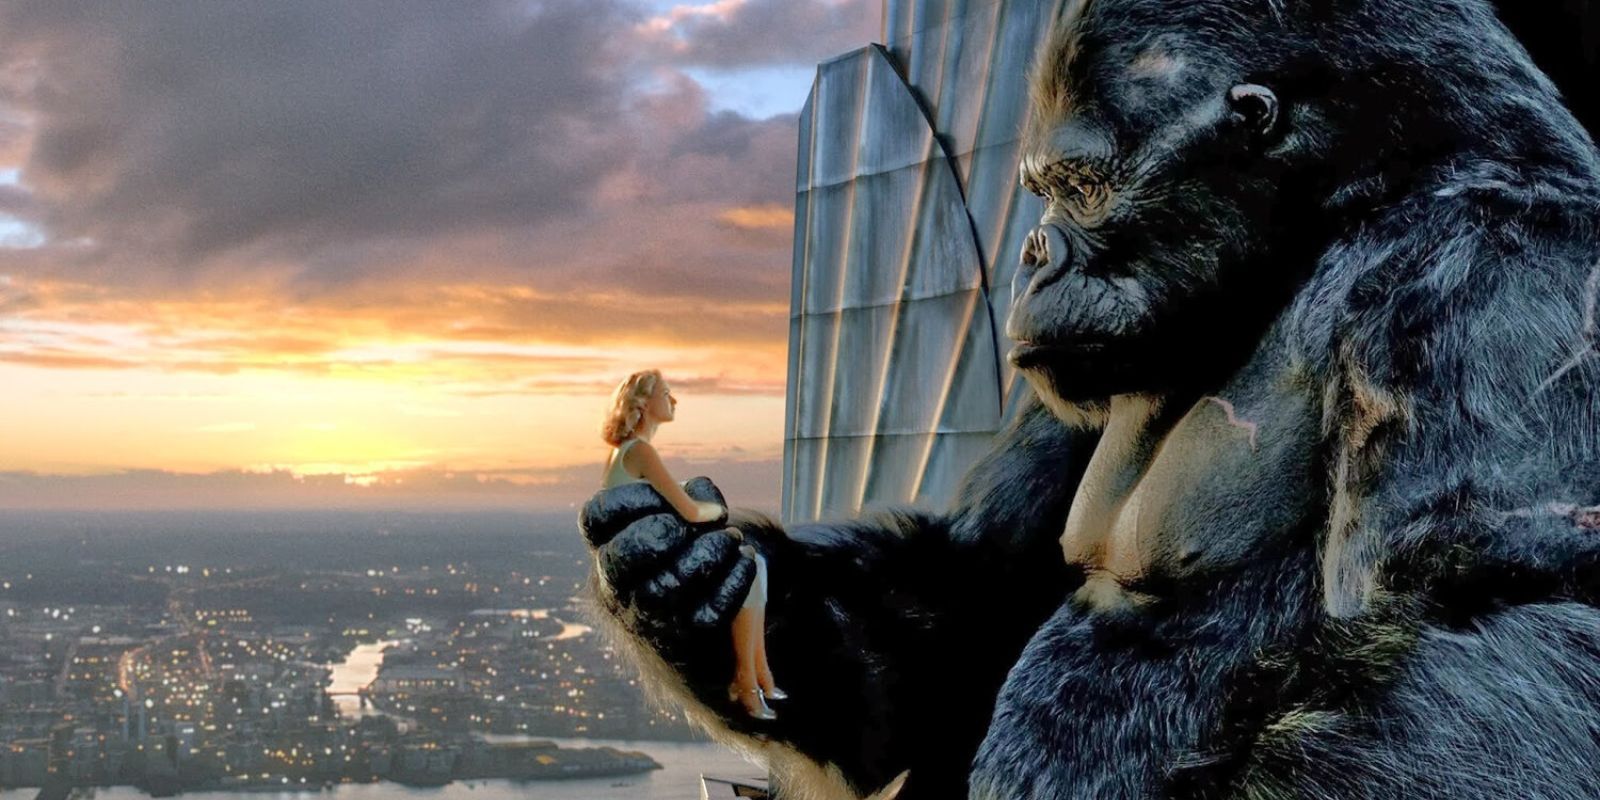 Naomi Watts as Anne Darrow being held by King Kong atop the Empire Sate Building in King Kong.